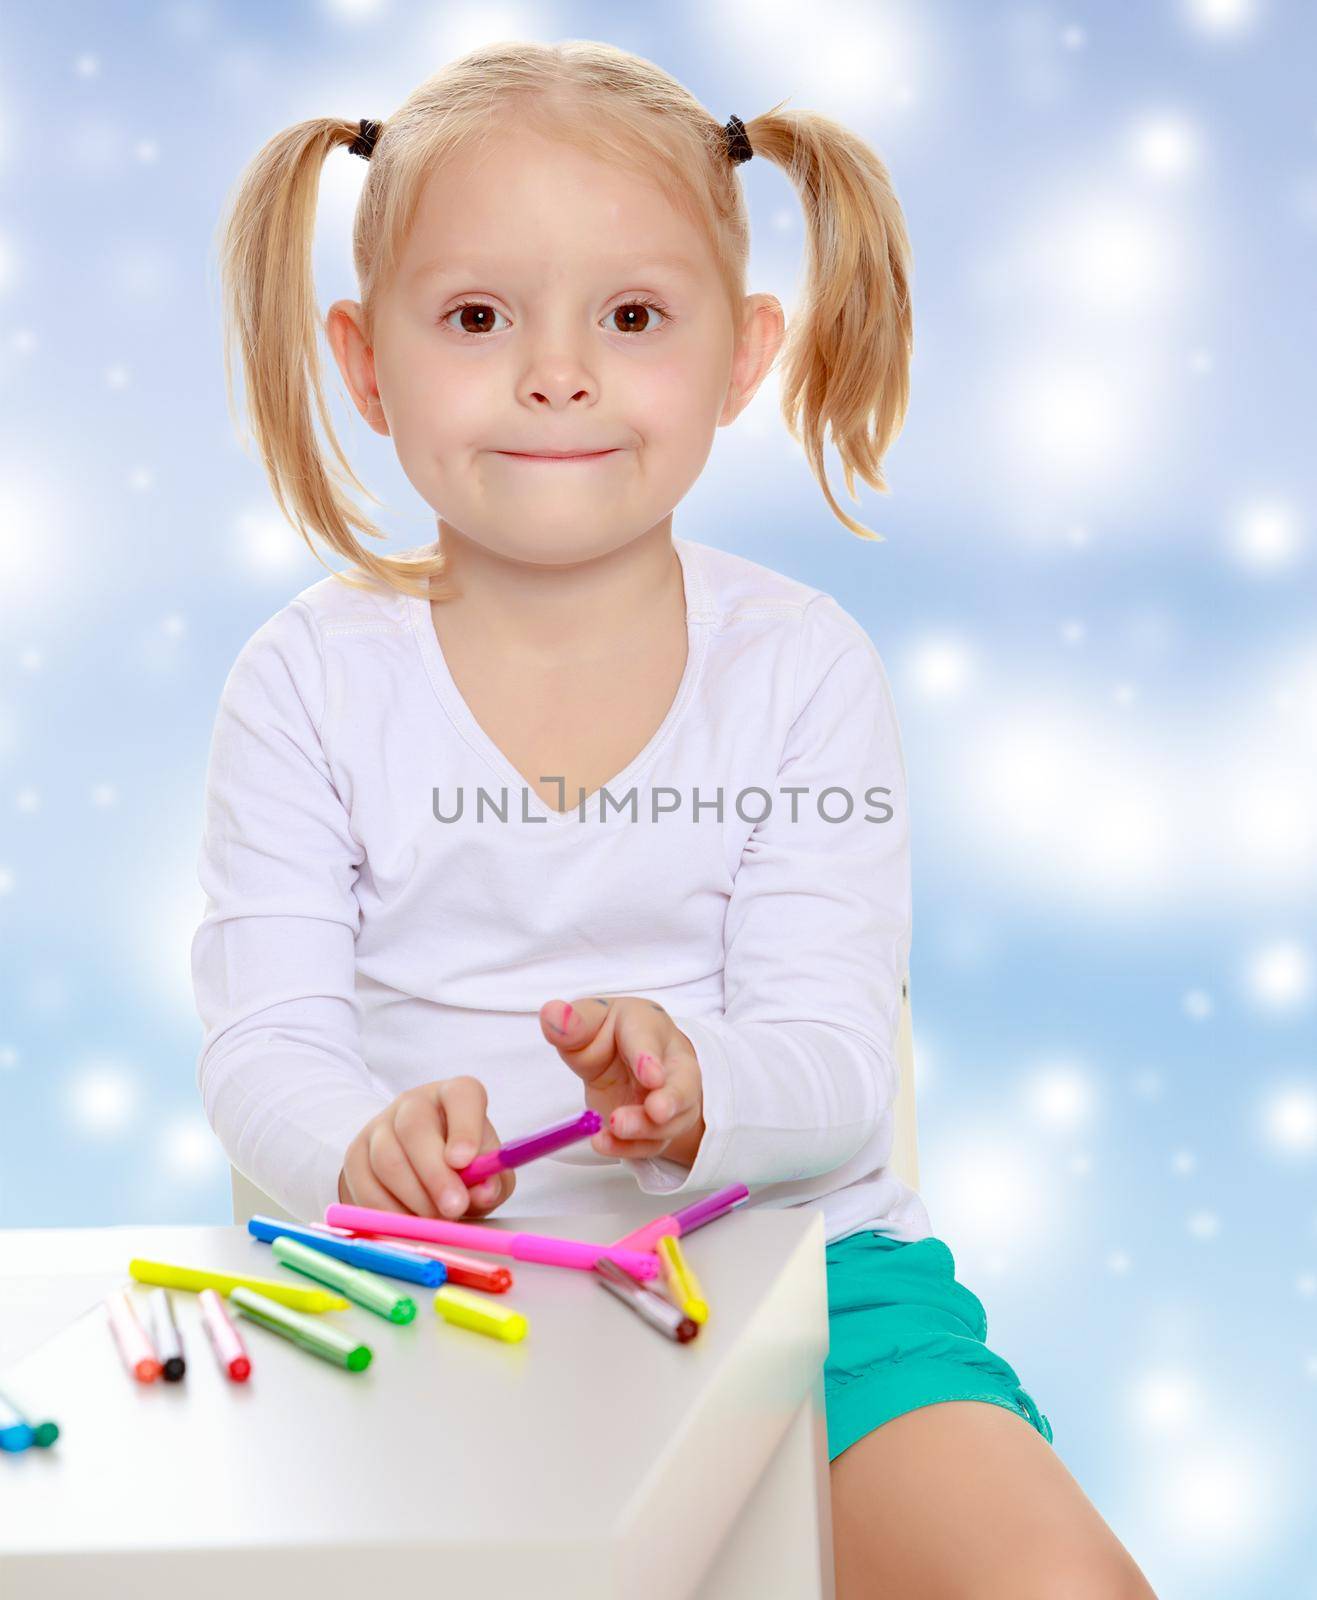 Pretty little blonde girl drawing with markers at the table.Girl holding in hands a pink marker.The concept of celebrating the New year, Holy Christmas, or child's birthday on a blue